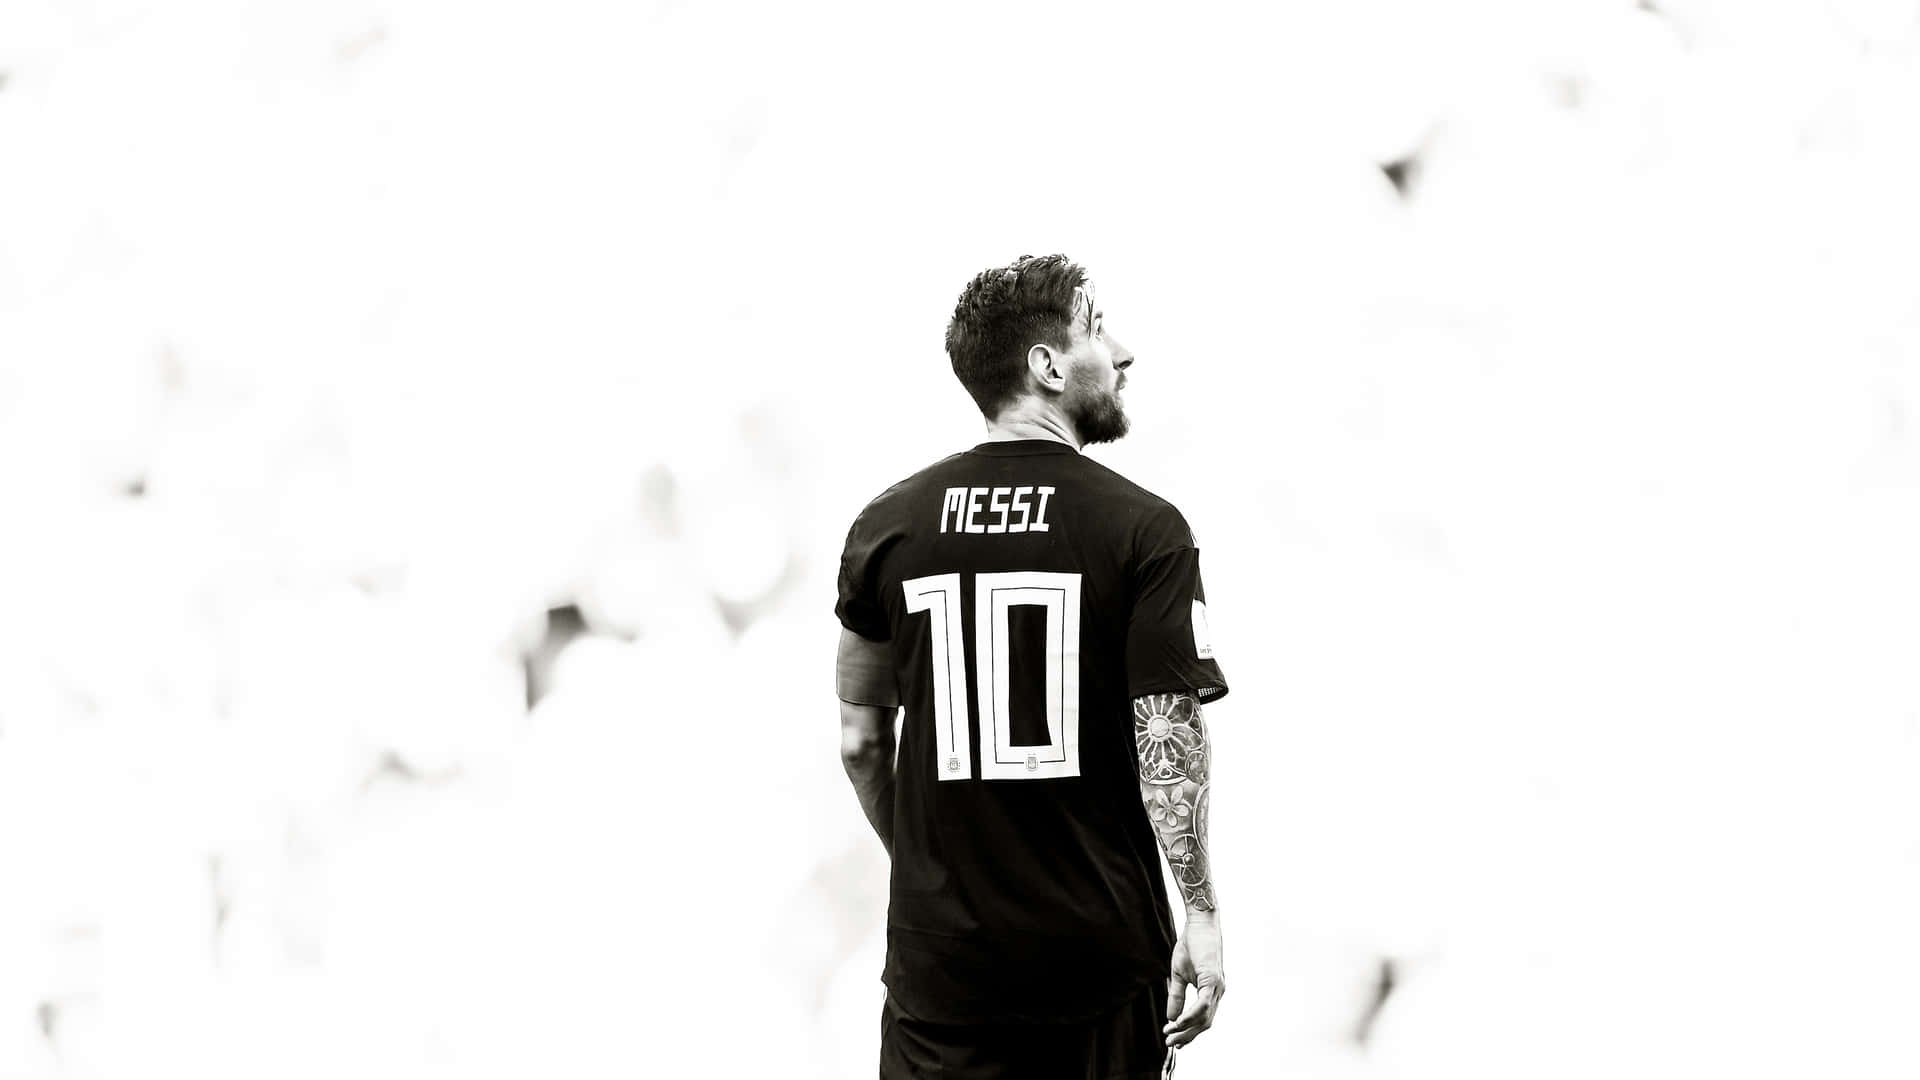 Messi Number10 Blackand White Wallpaper